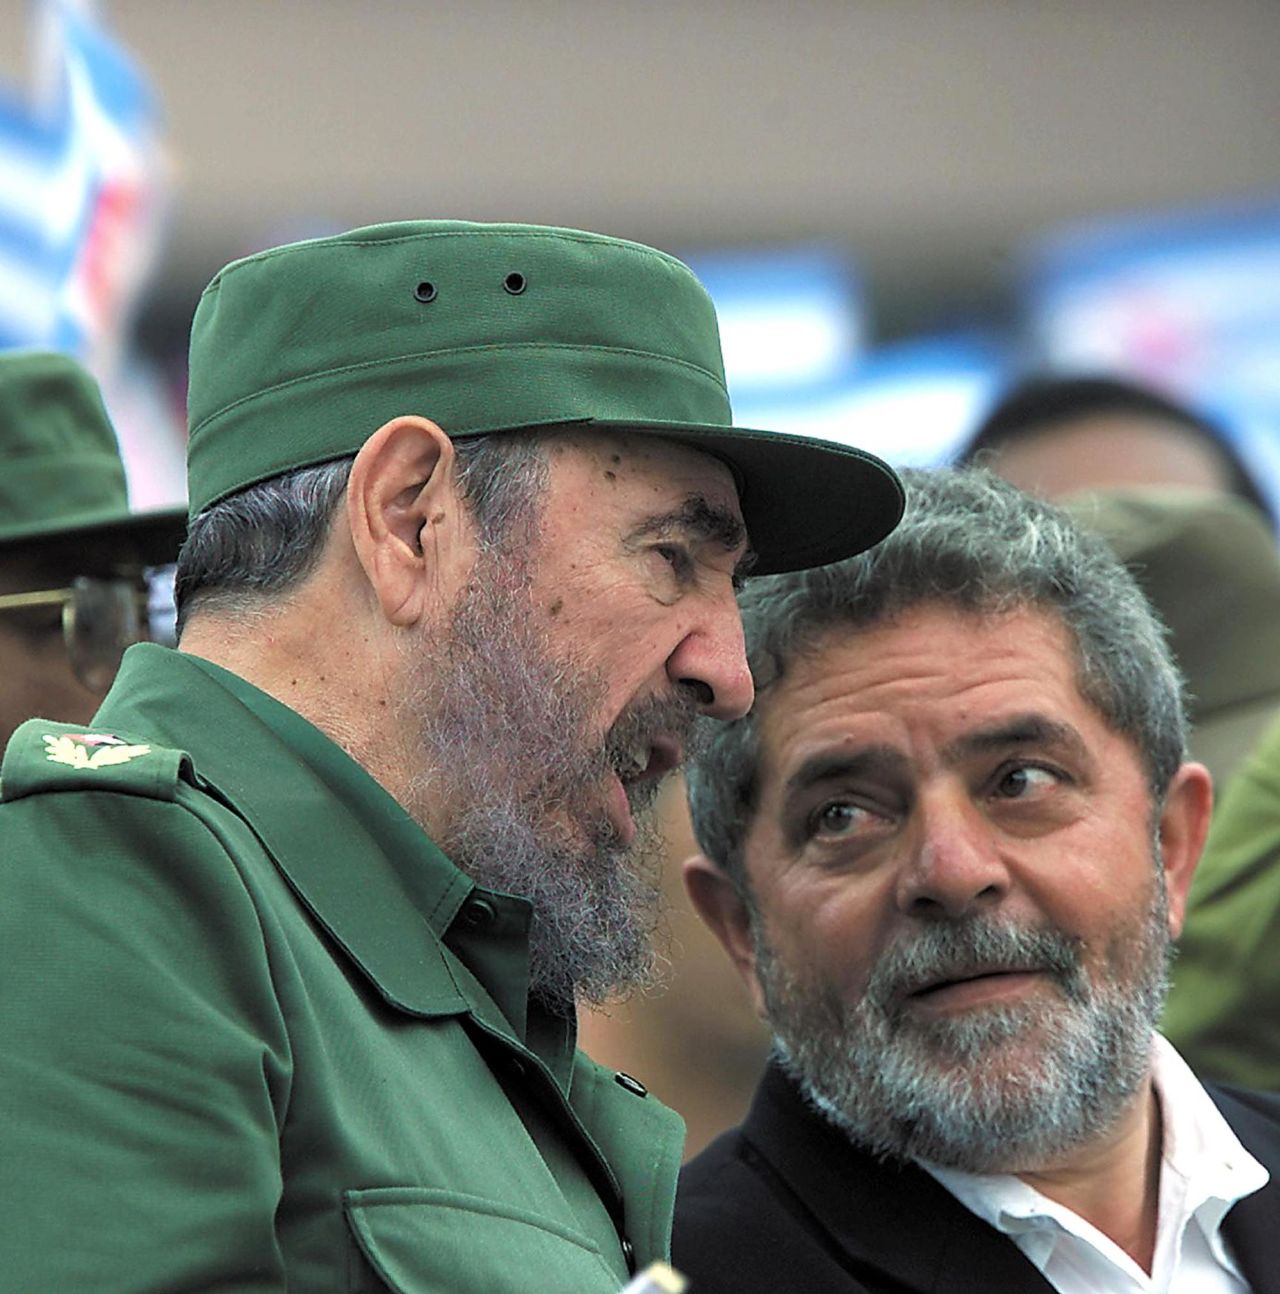 Cuban leader Fidel Castro, left, speaks with Lula during a political gathering of some nearly 100,000 students in Havana, Cuba, in 2000. The two were known to be longtime friends.